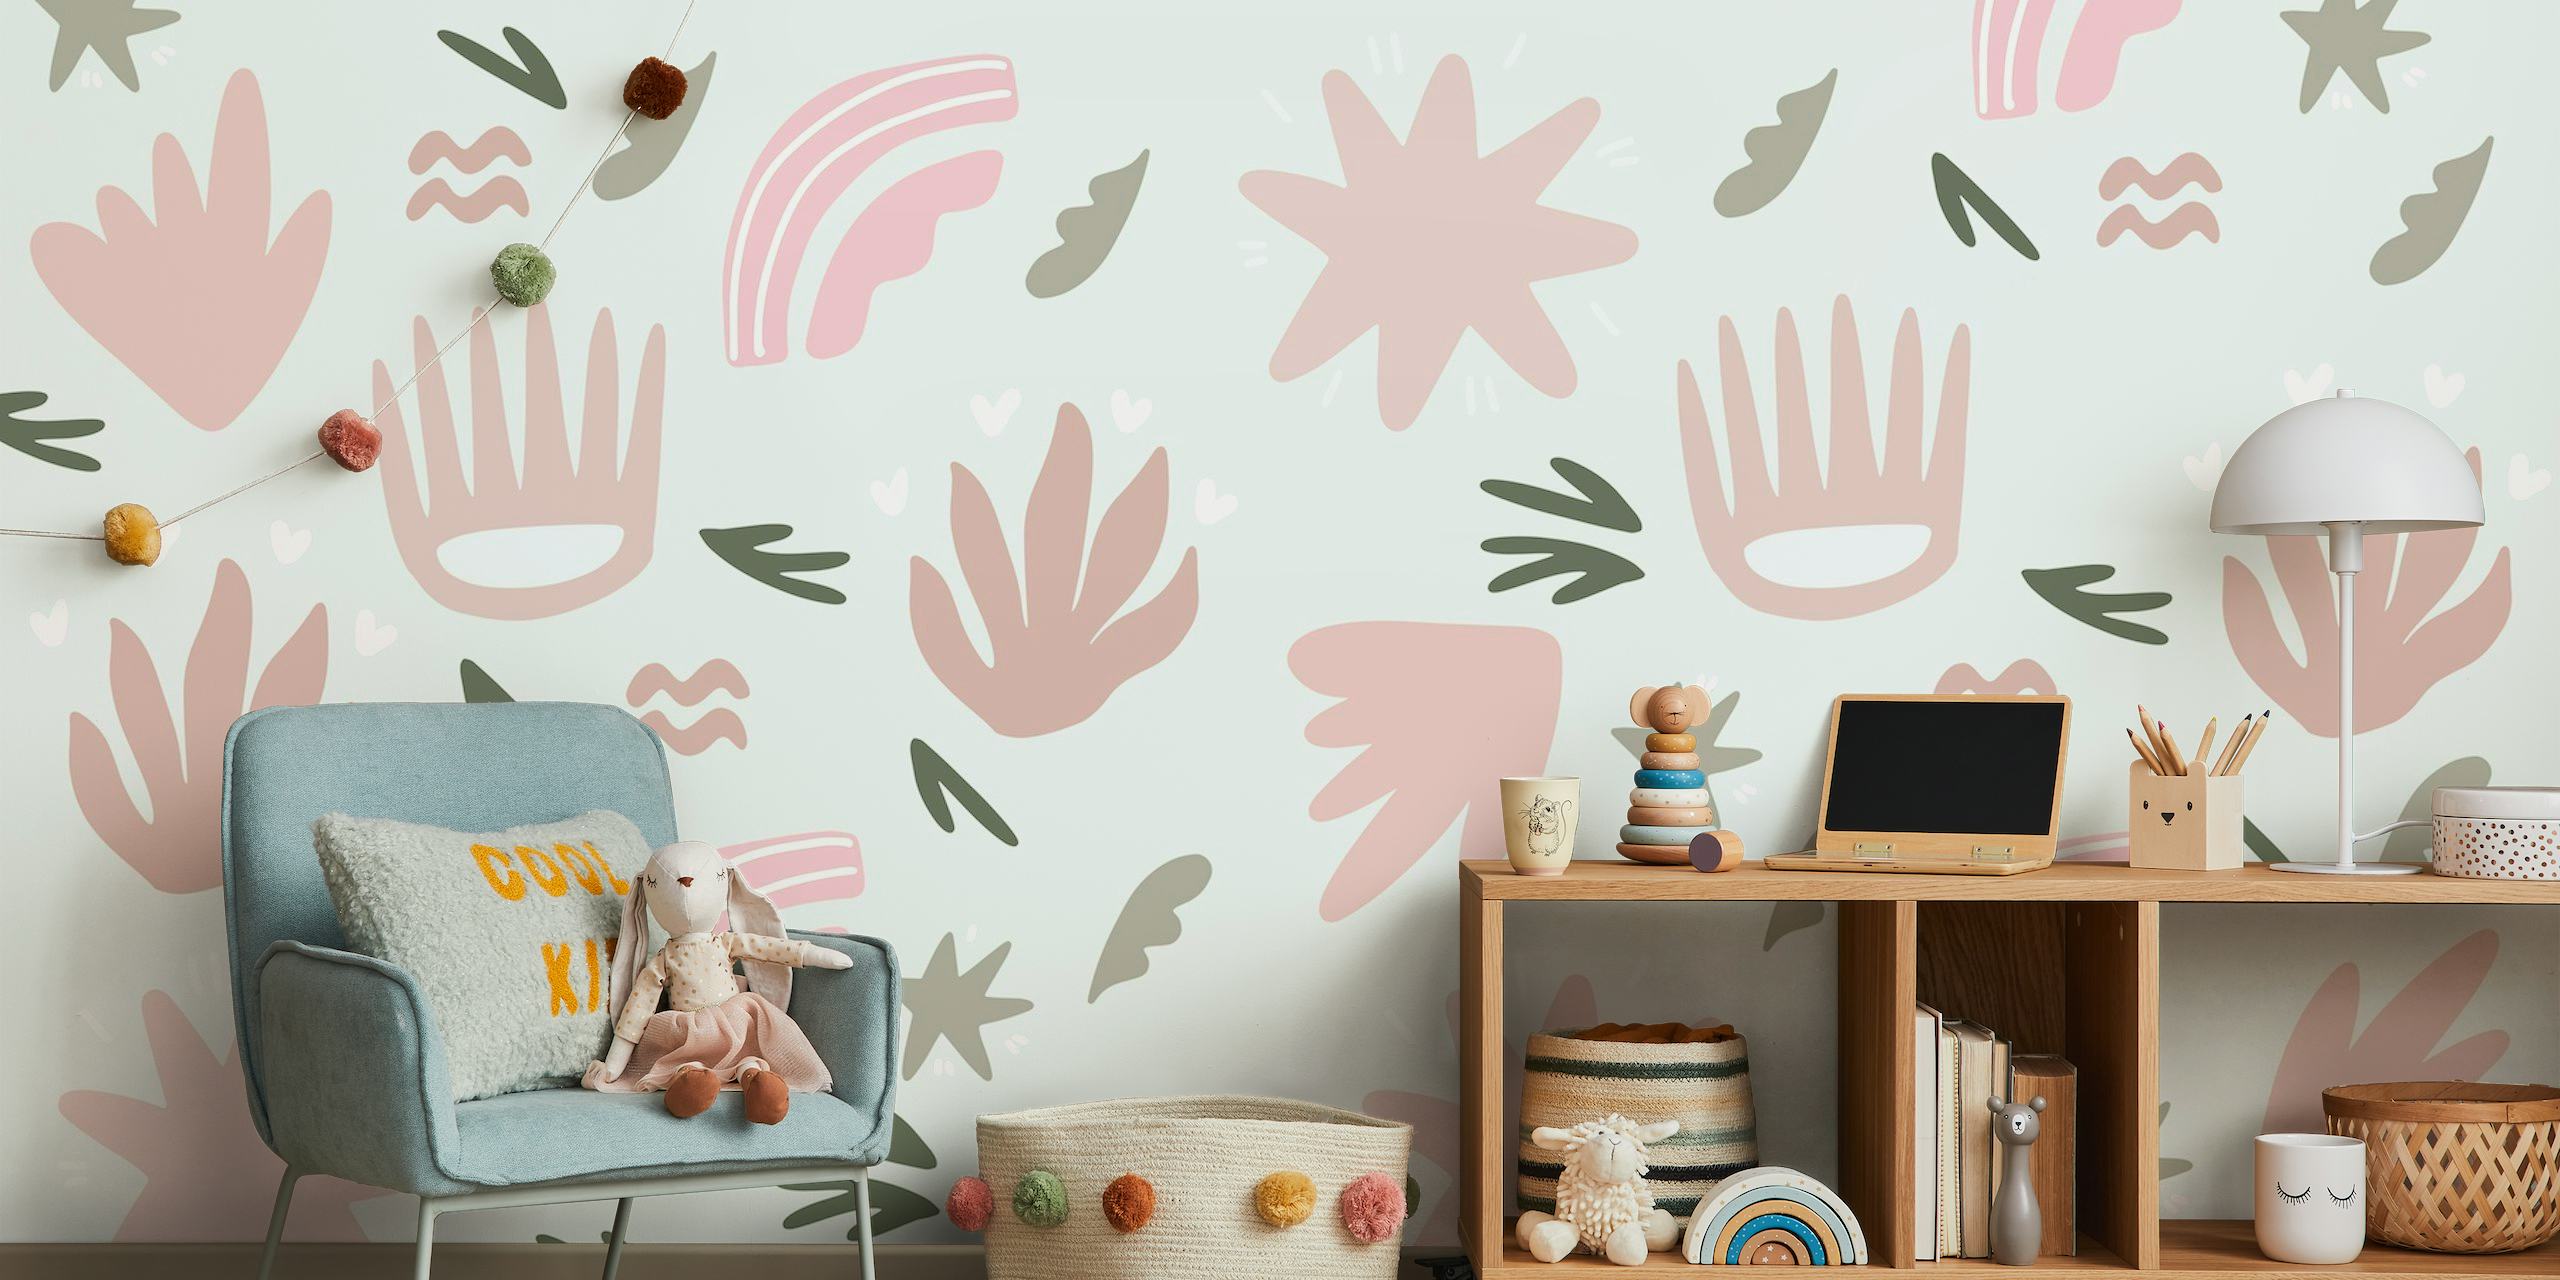 Abstract playful floral wall mural in soft pinks and greys for children's room